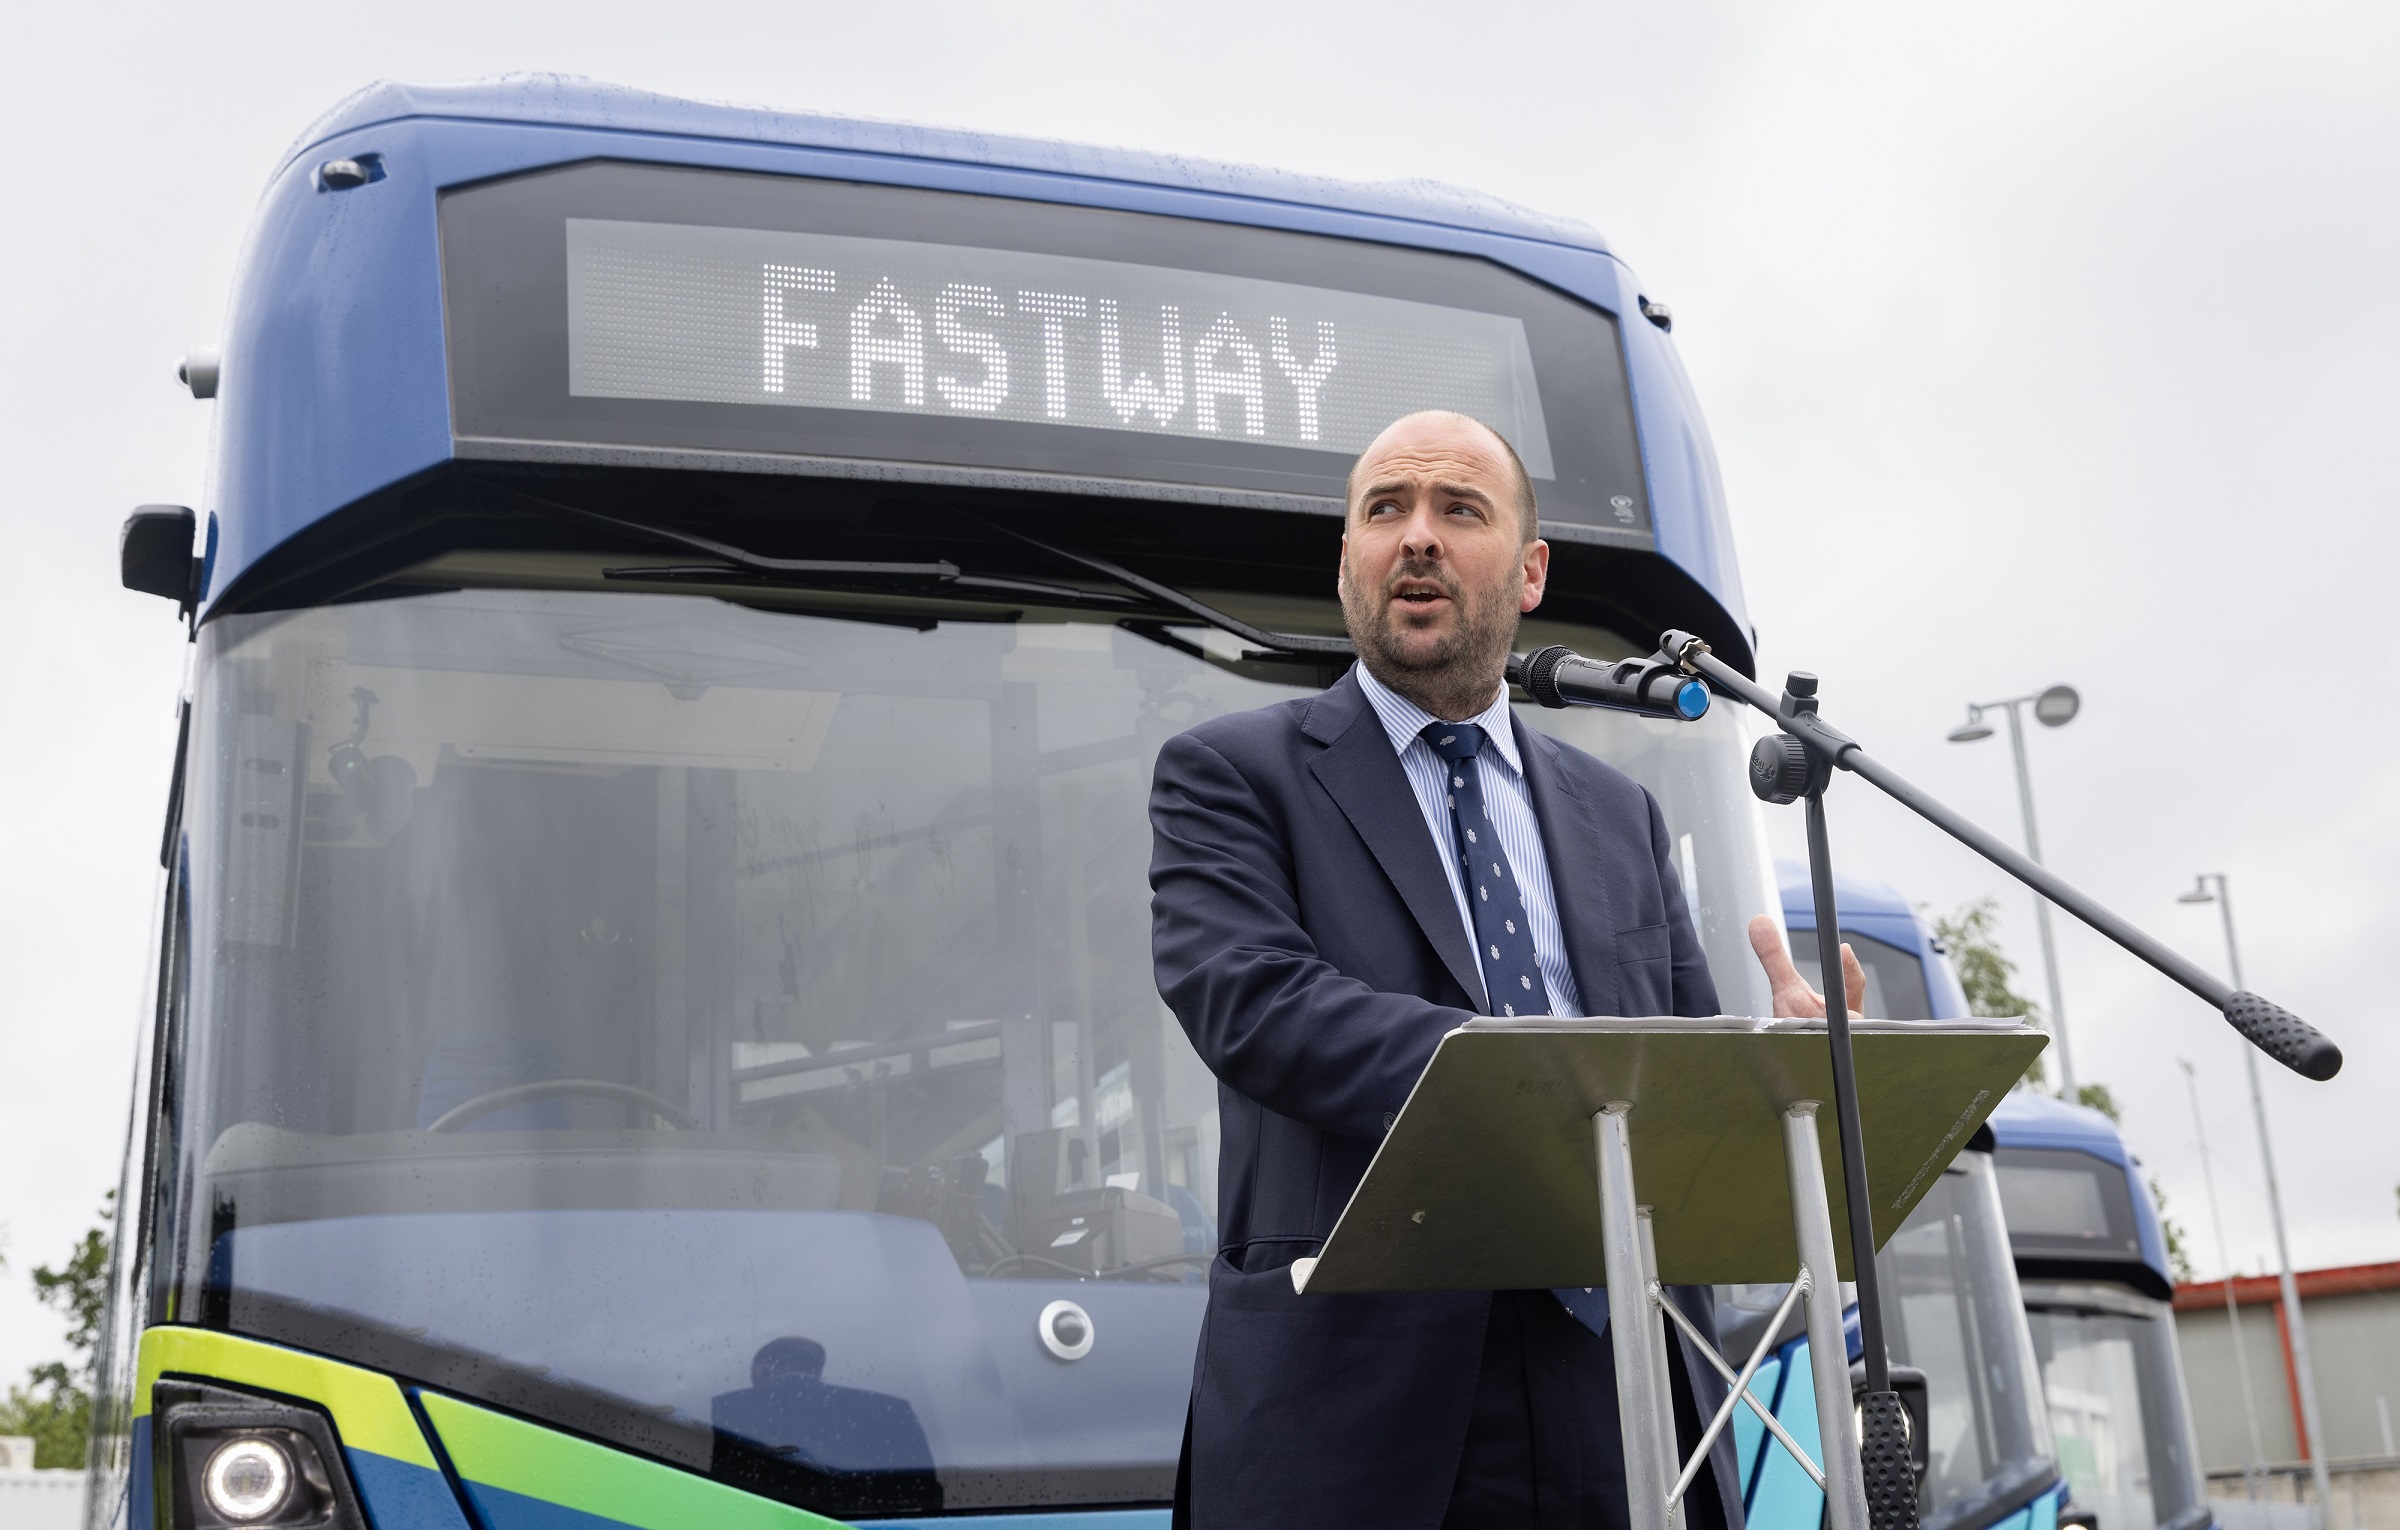 Under Secretary of State for Transport Richard Holden at bus launch